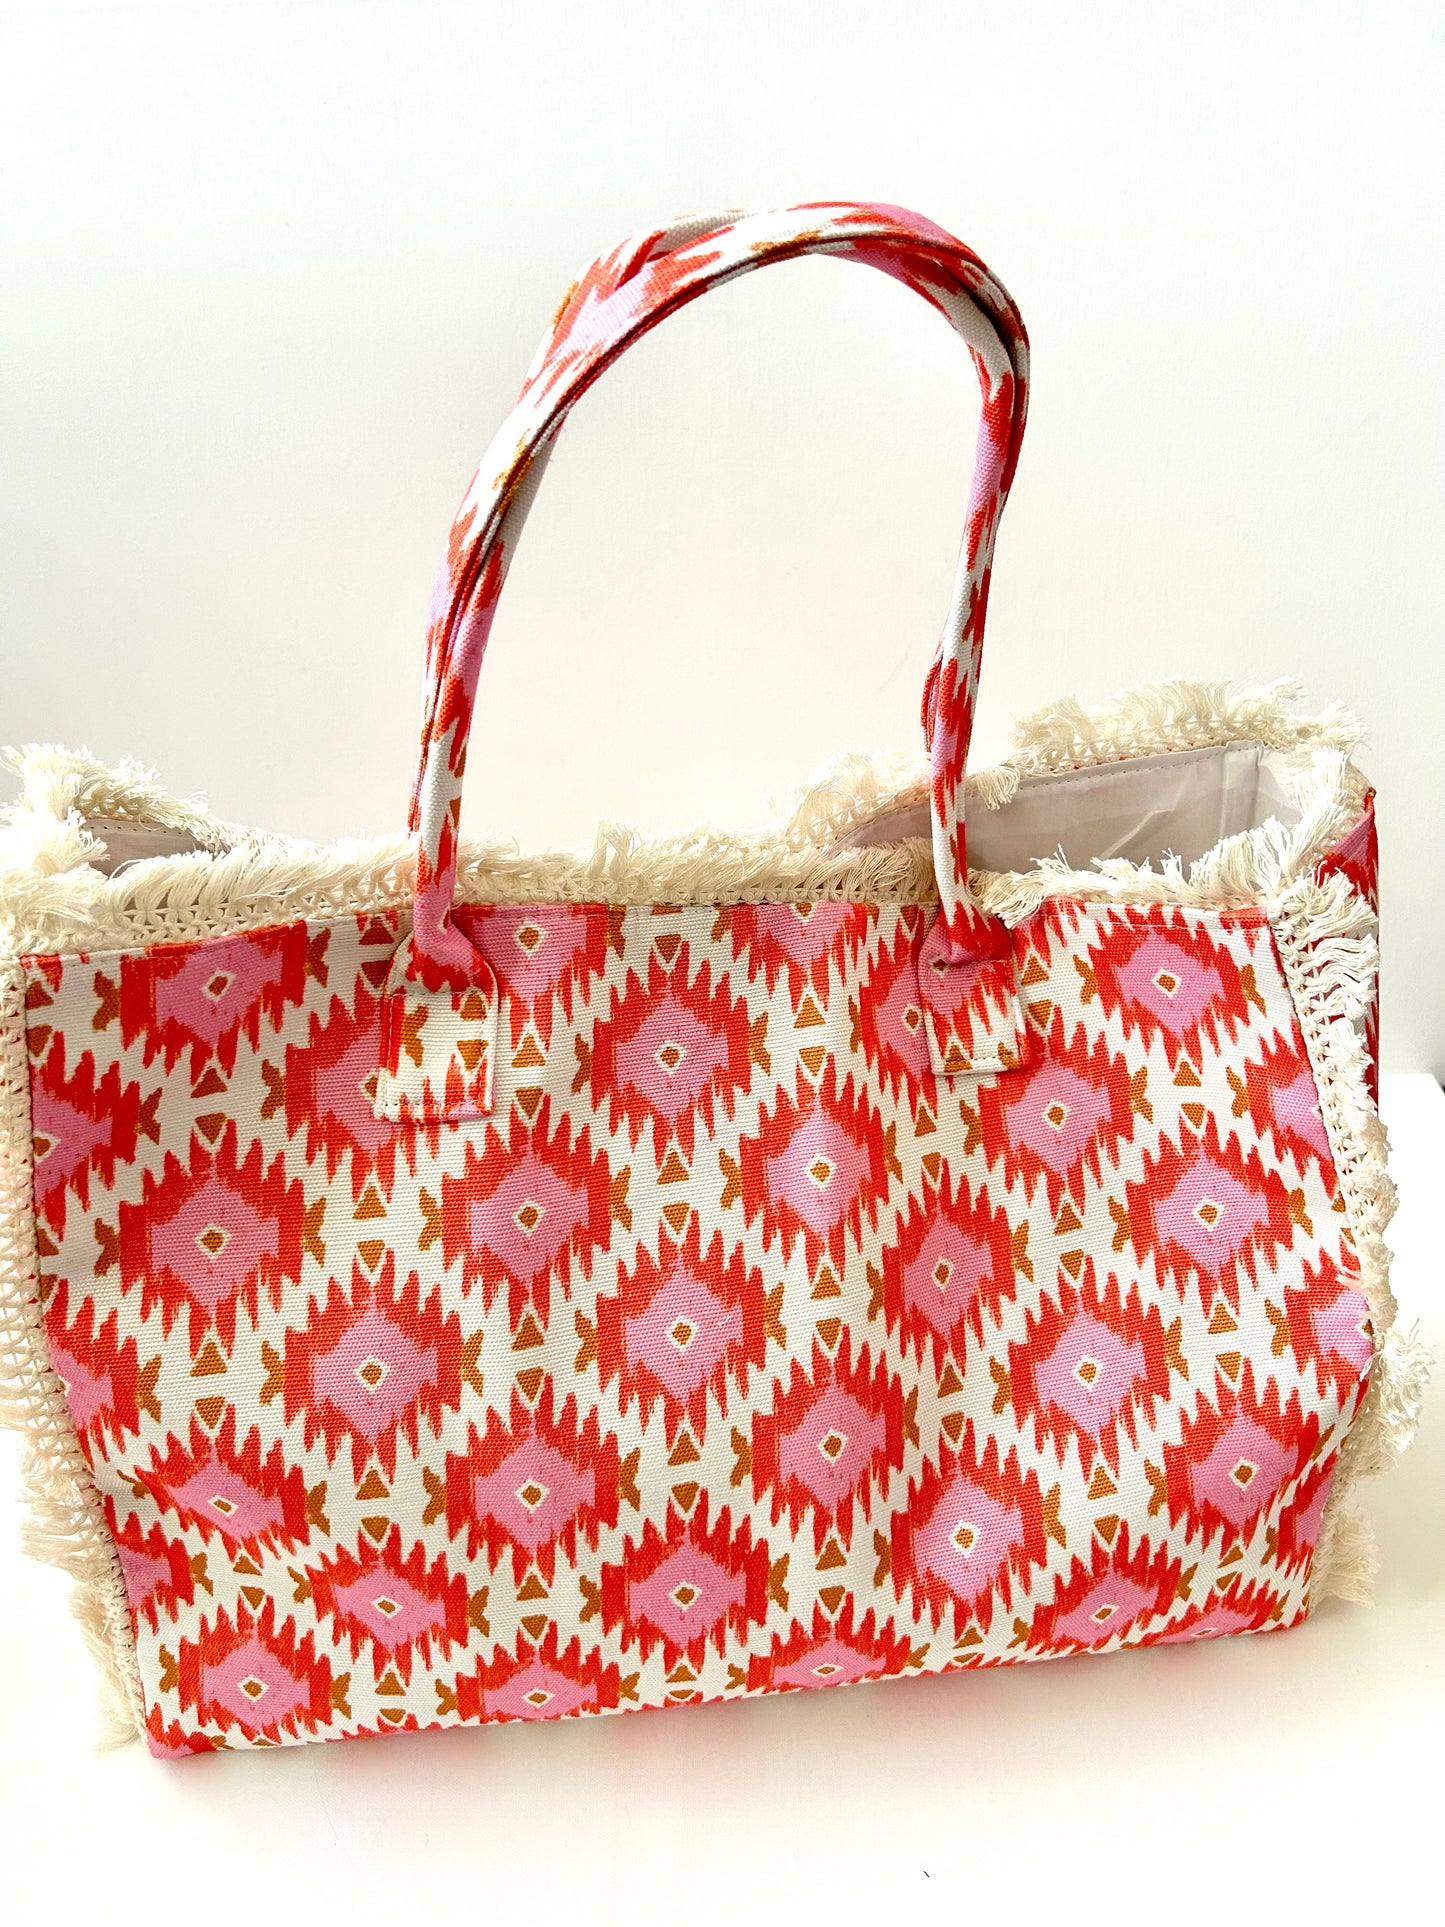 Bohemian Tote Bag with Fringe - Pink + Red